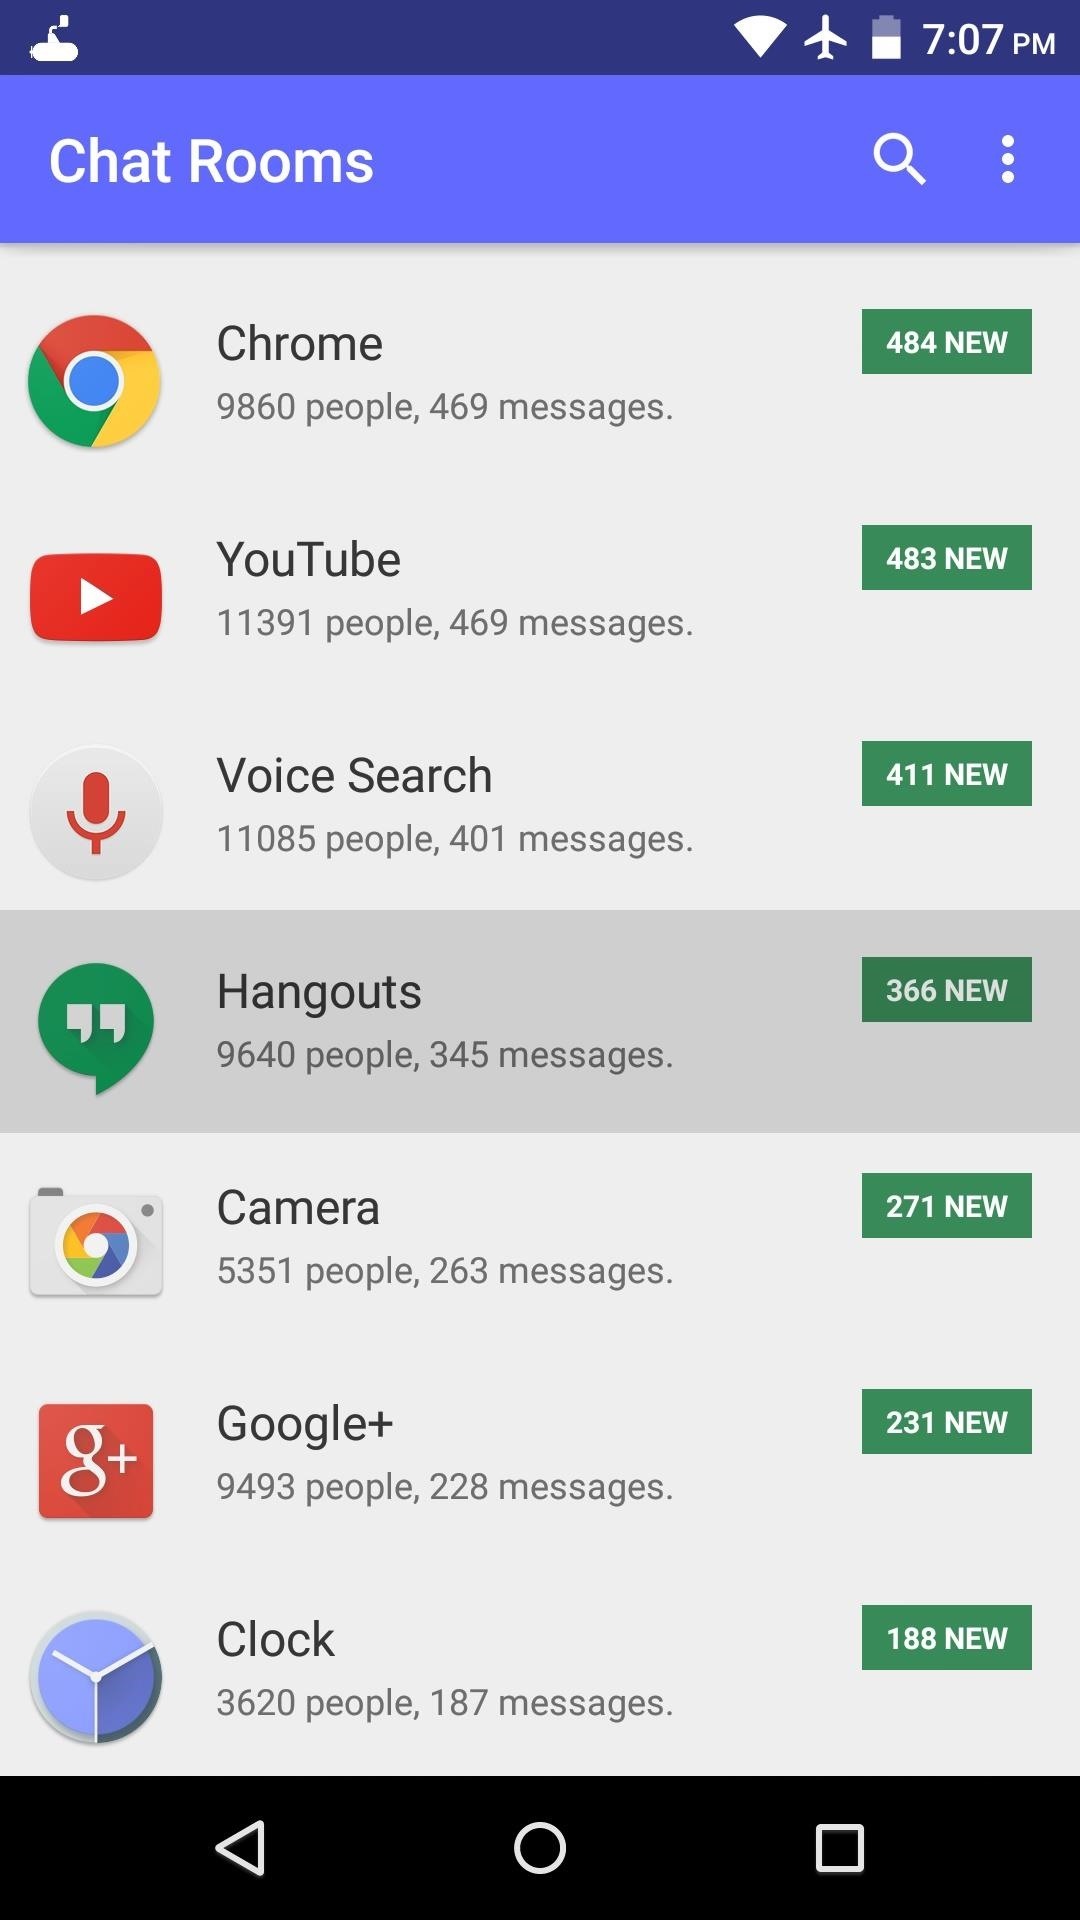 Get Crowd-Sourced Tech Support for Any App on Android